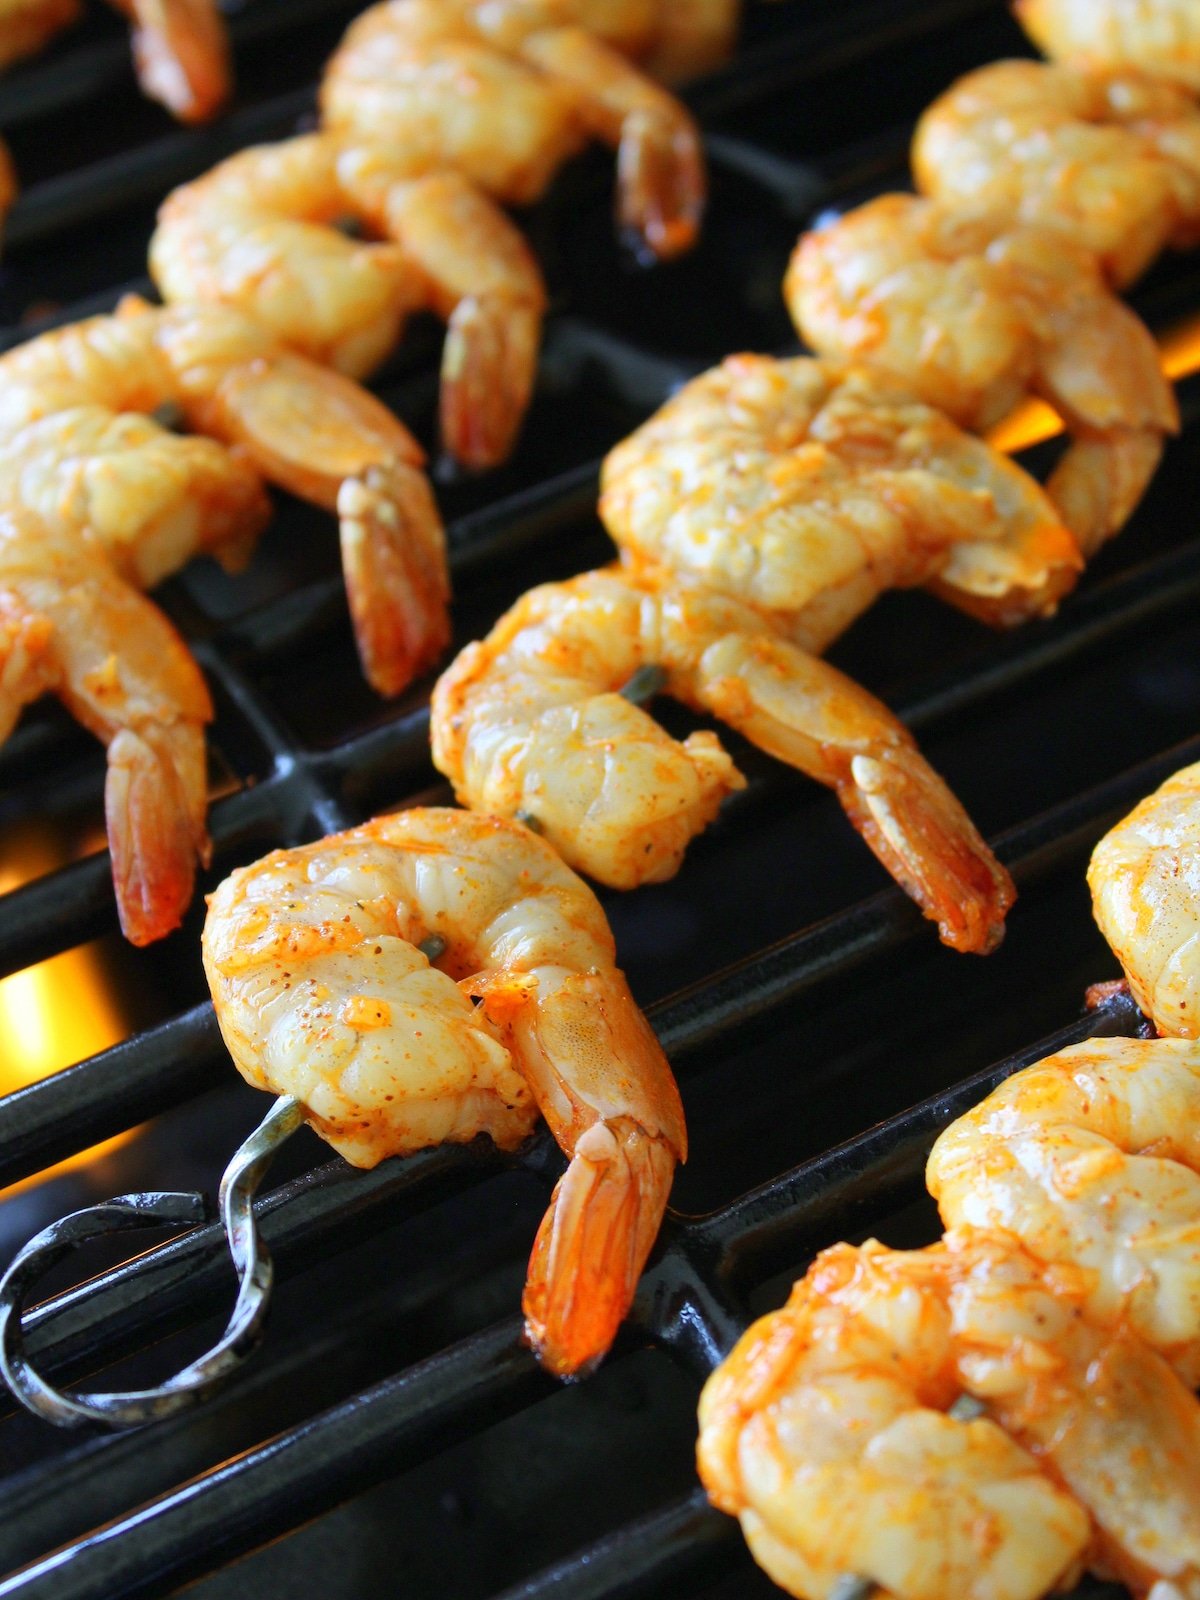 A close-up photo of shrimp on the grill.